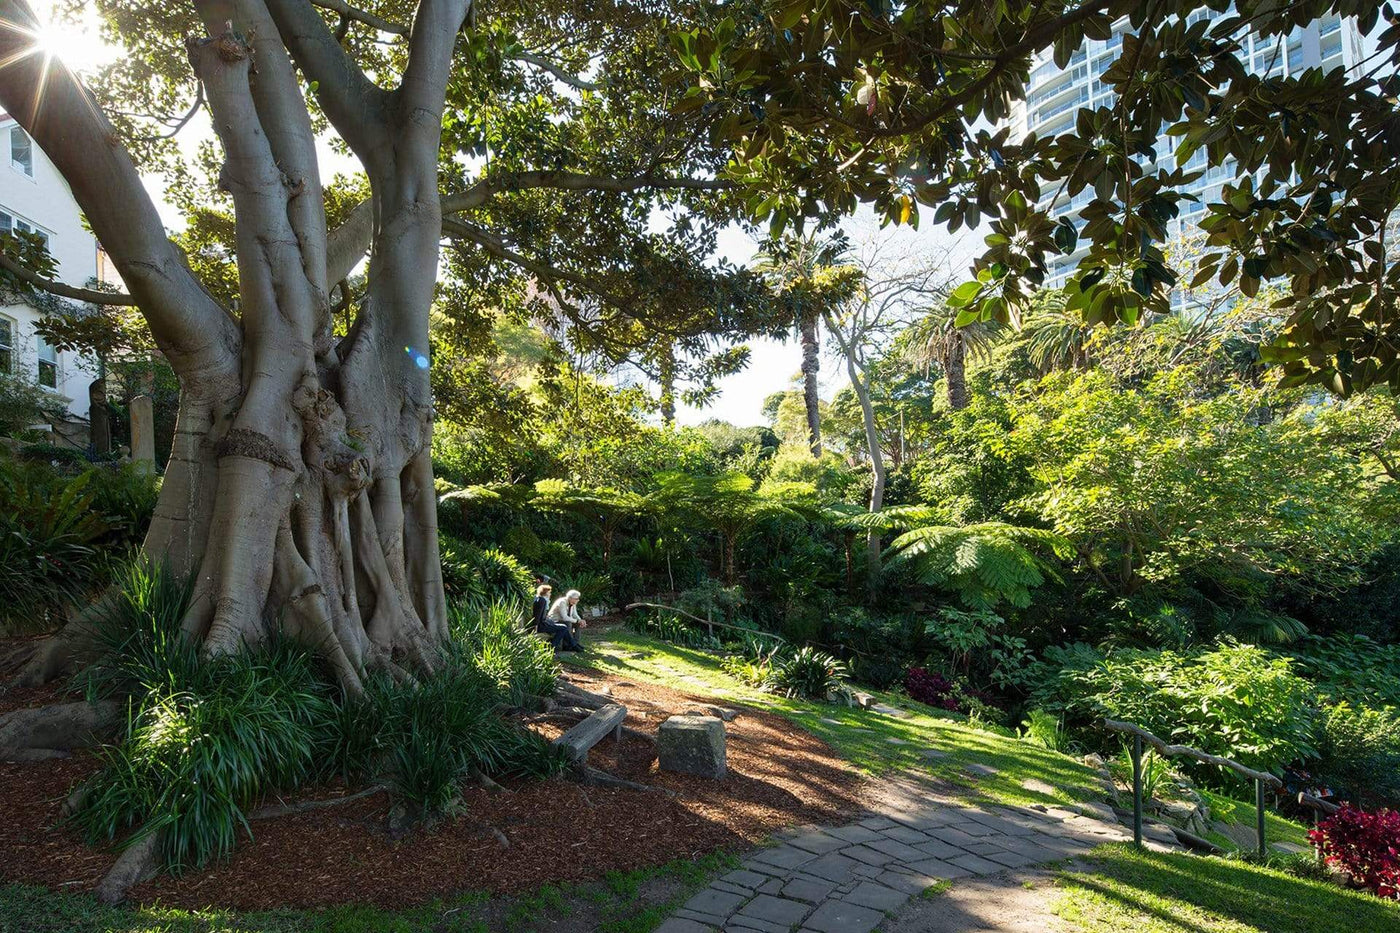 Sydney's Best Parks - Where to Go for a Sunday Afternoon Picnic